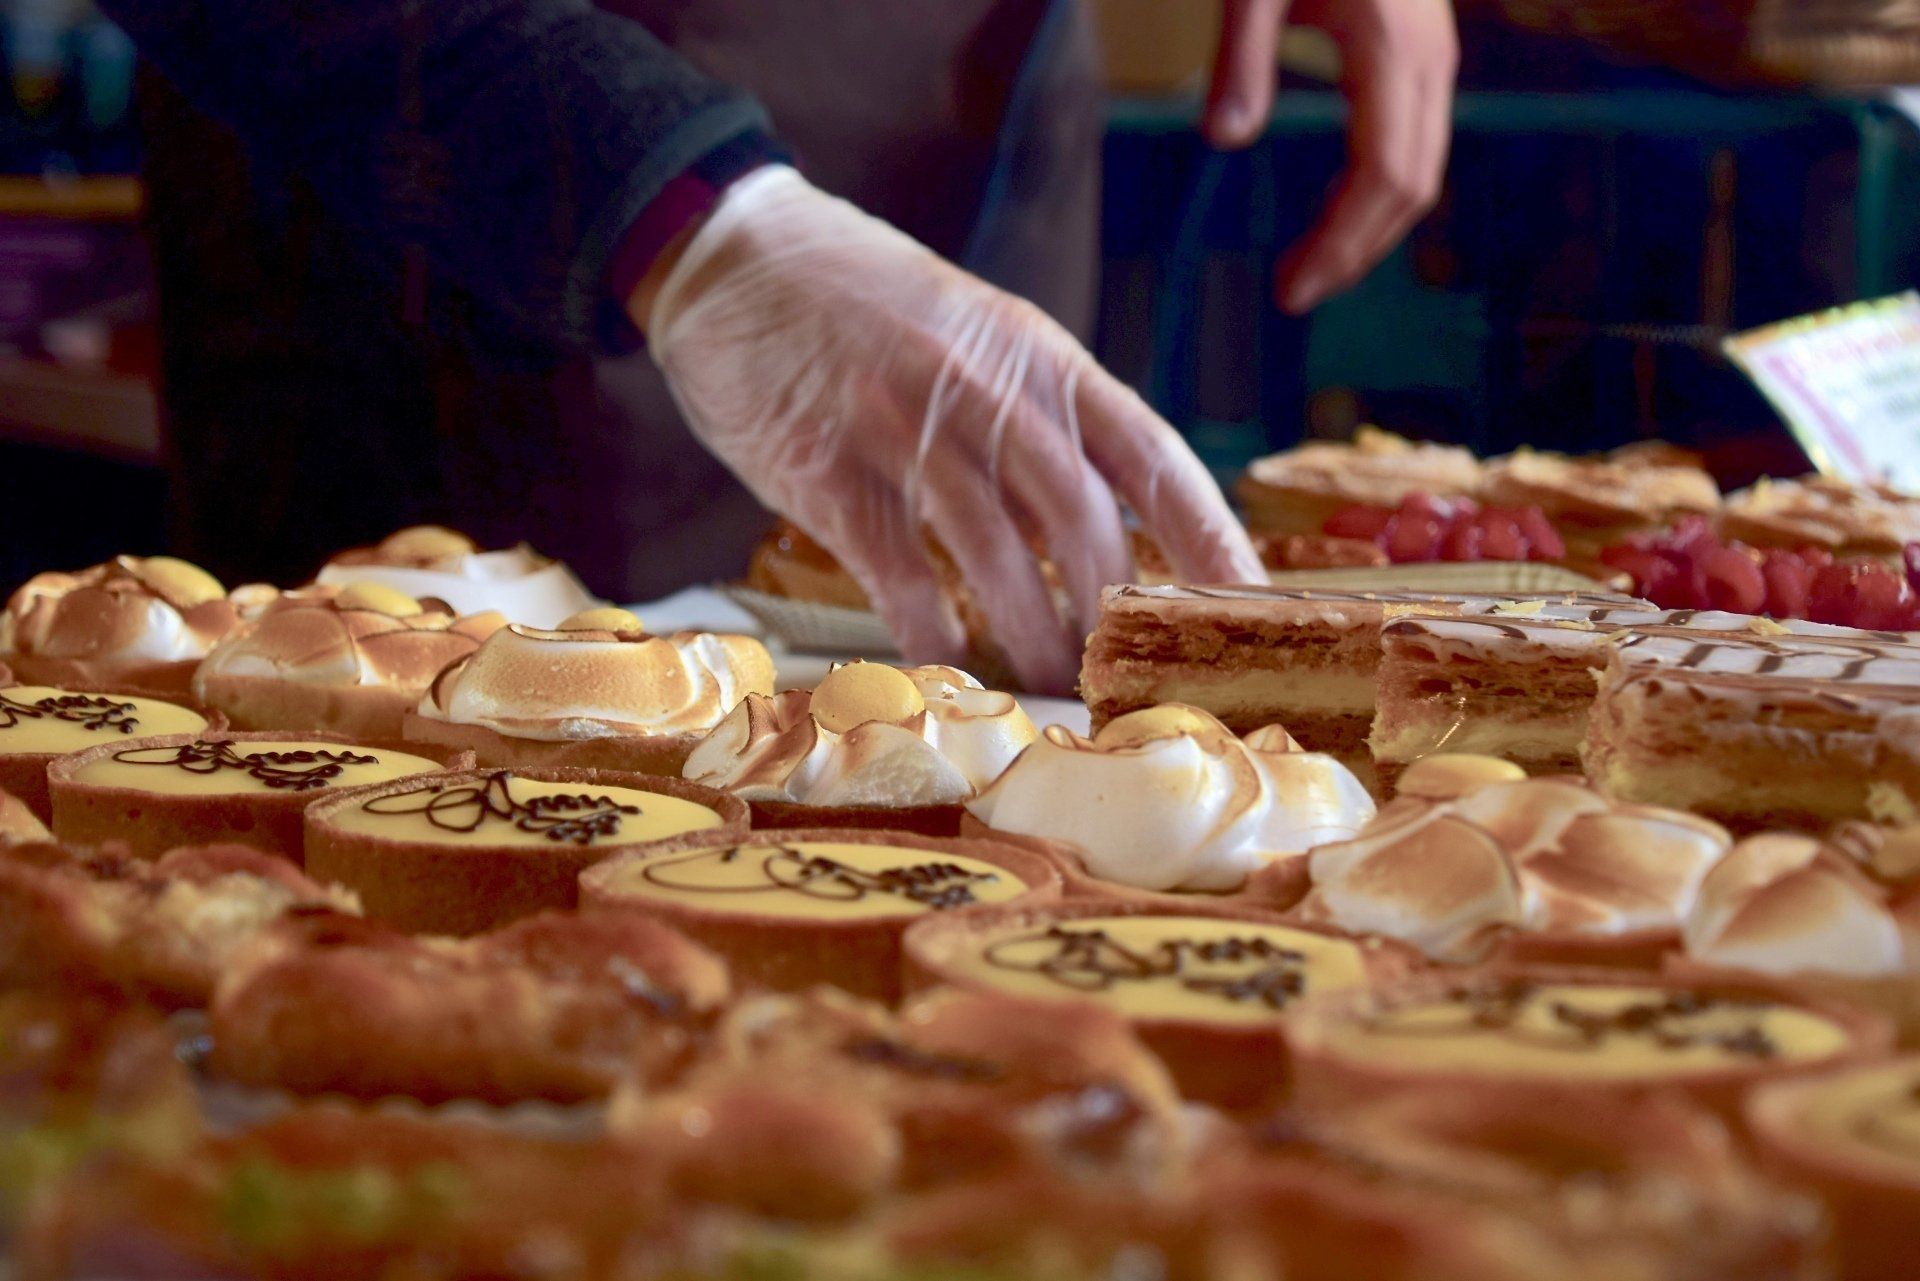 a person wearing gloves is reaching for a pastry on a table .